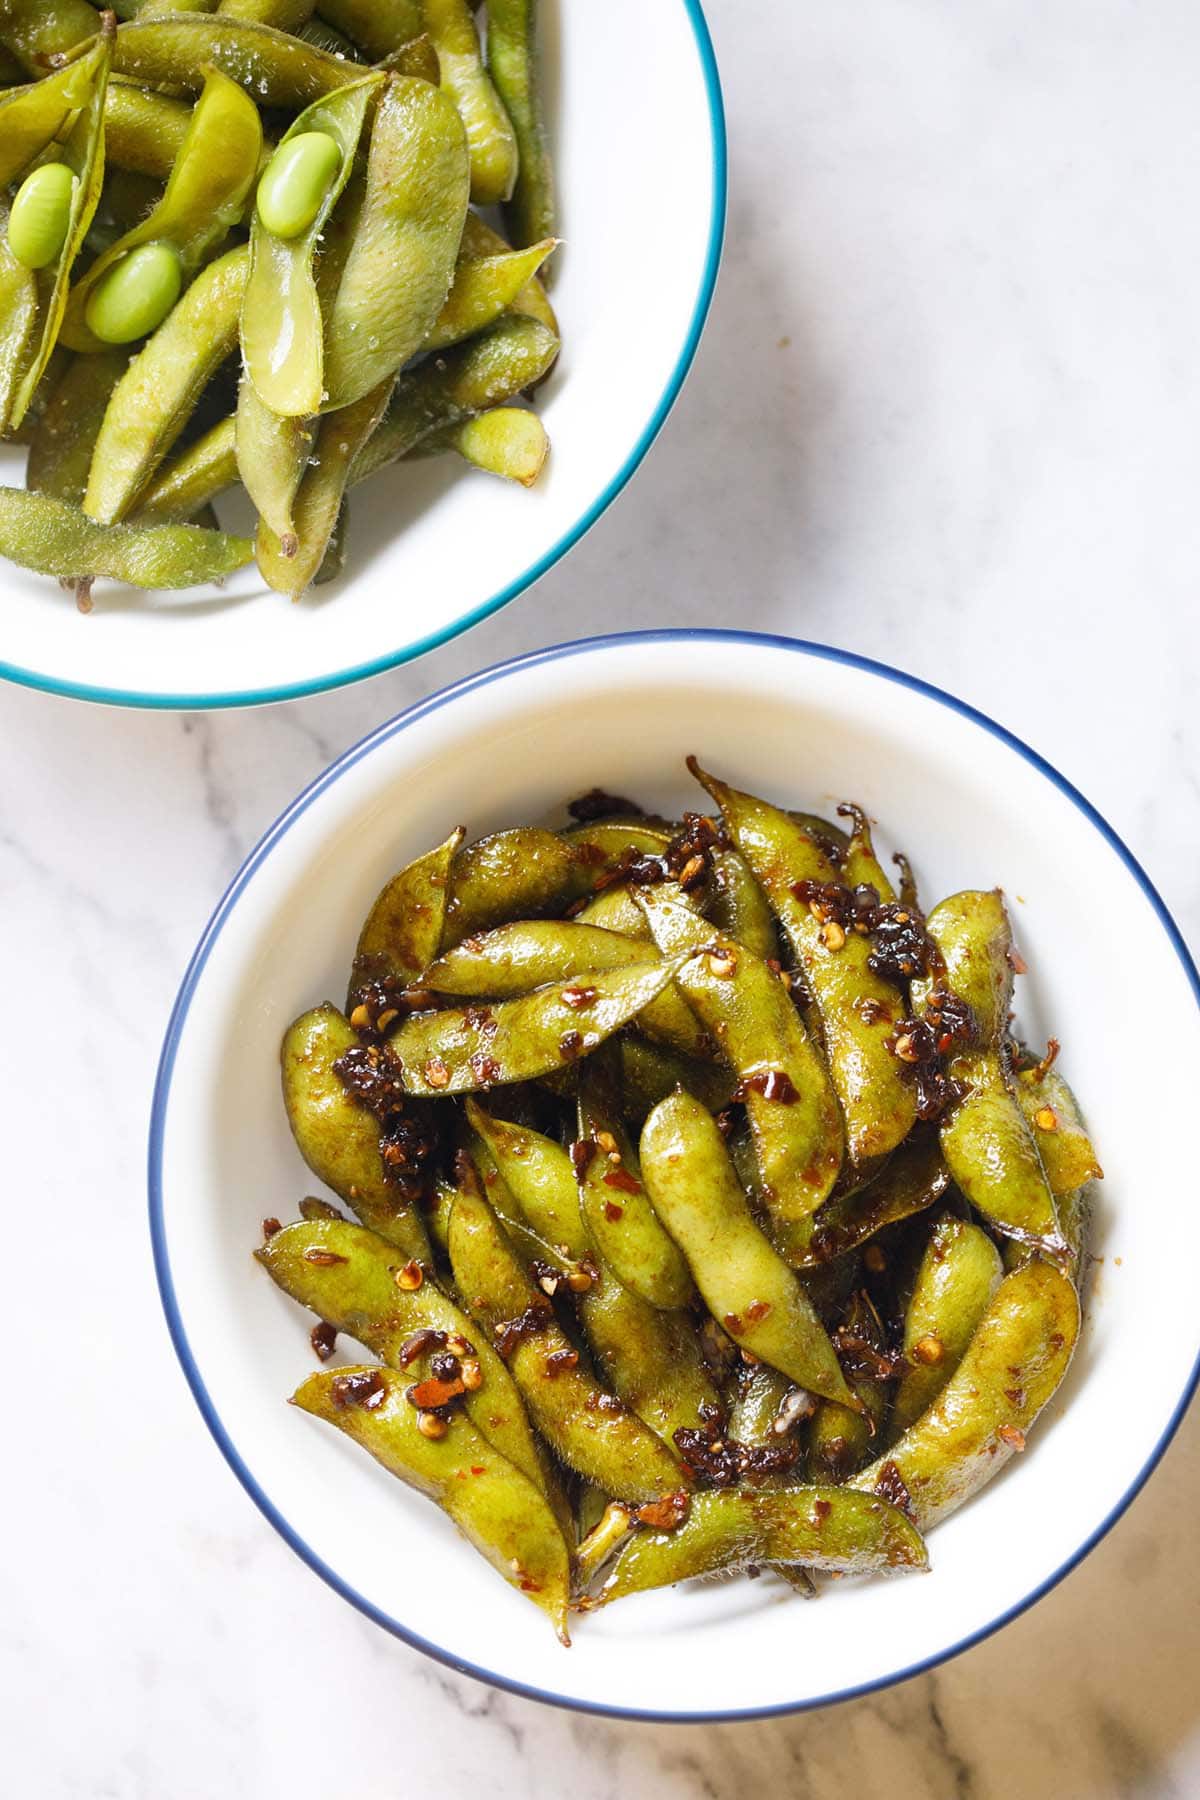 spicy edamame or soyabean chilli garlic in blue rimmed white bowl.